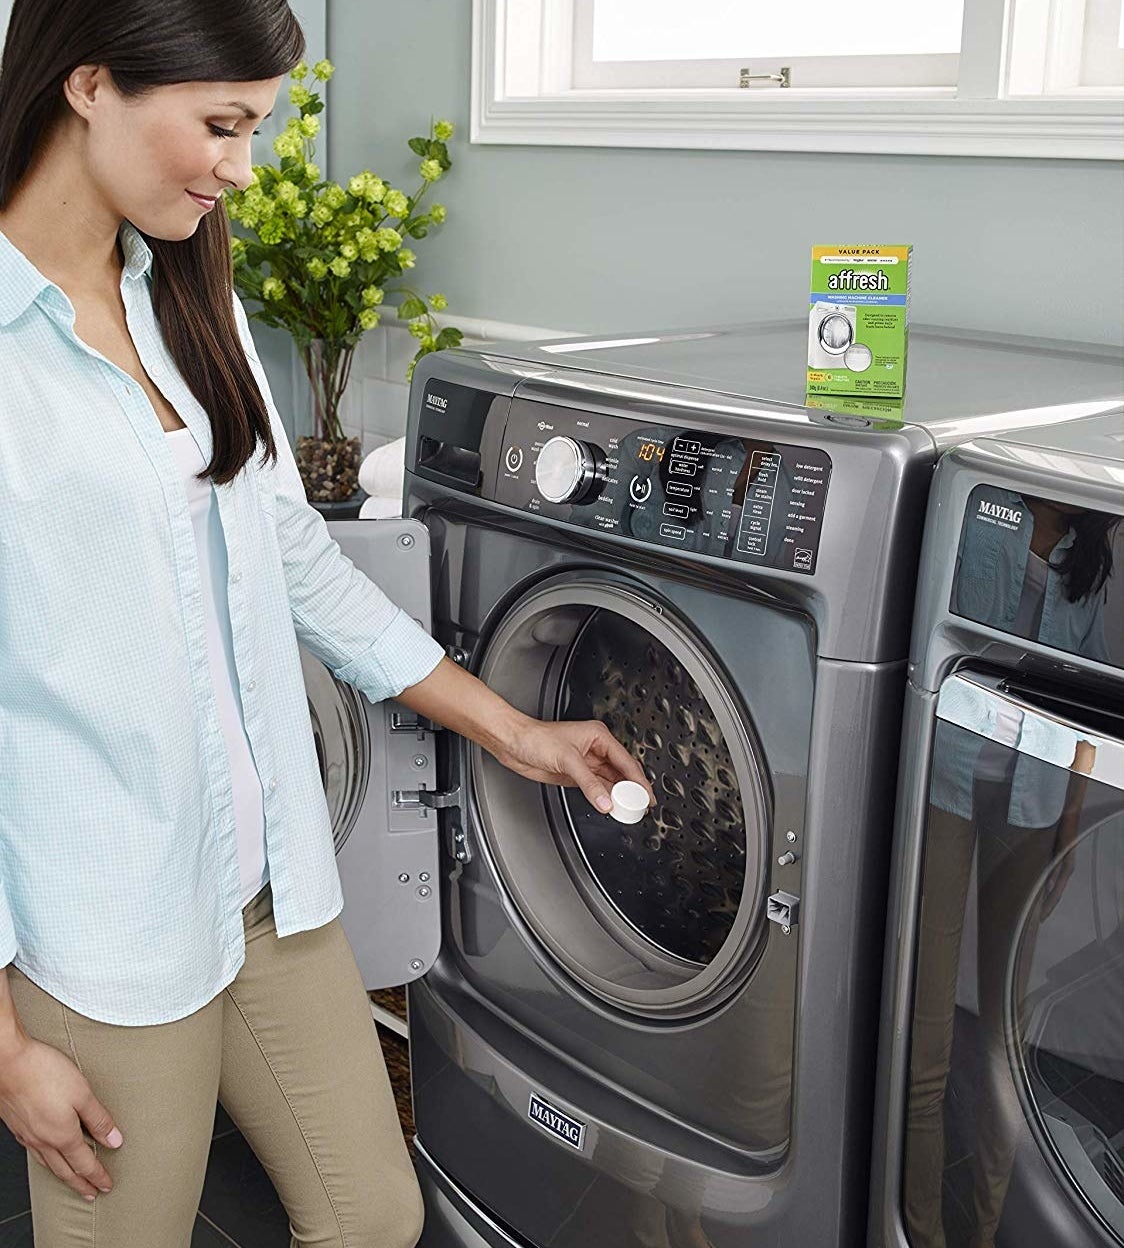 a hand holding a tablet above a washing machine